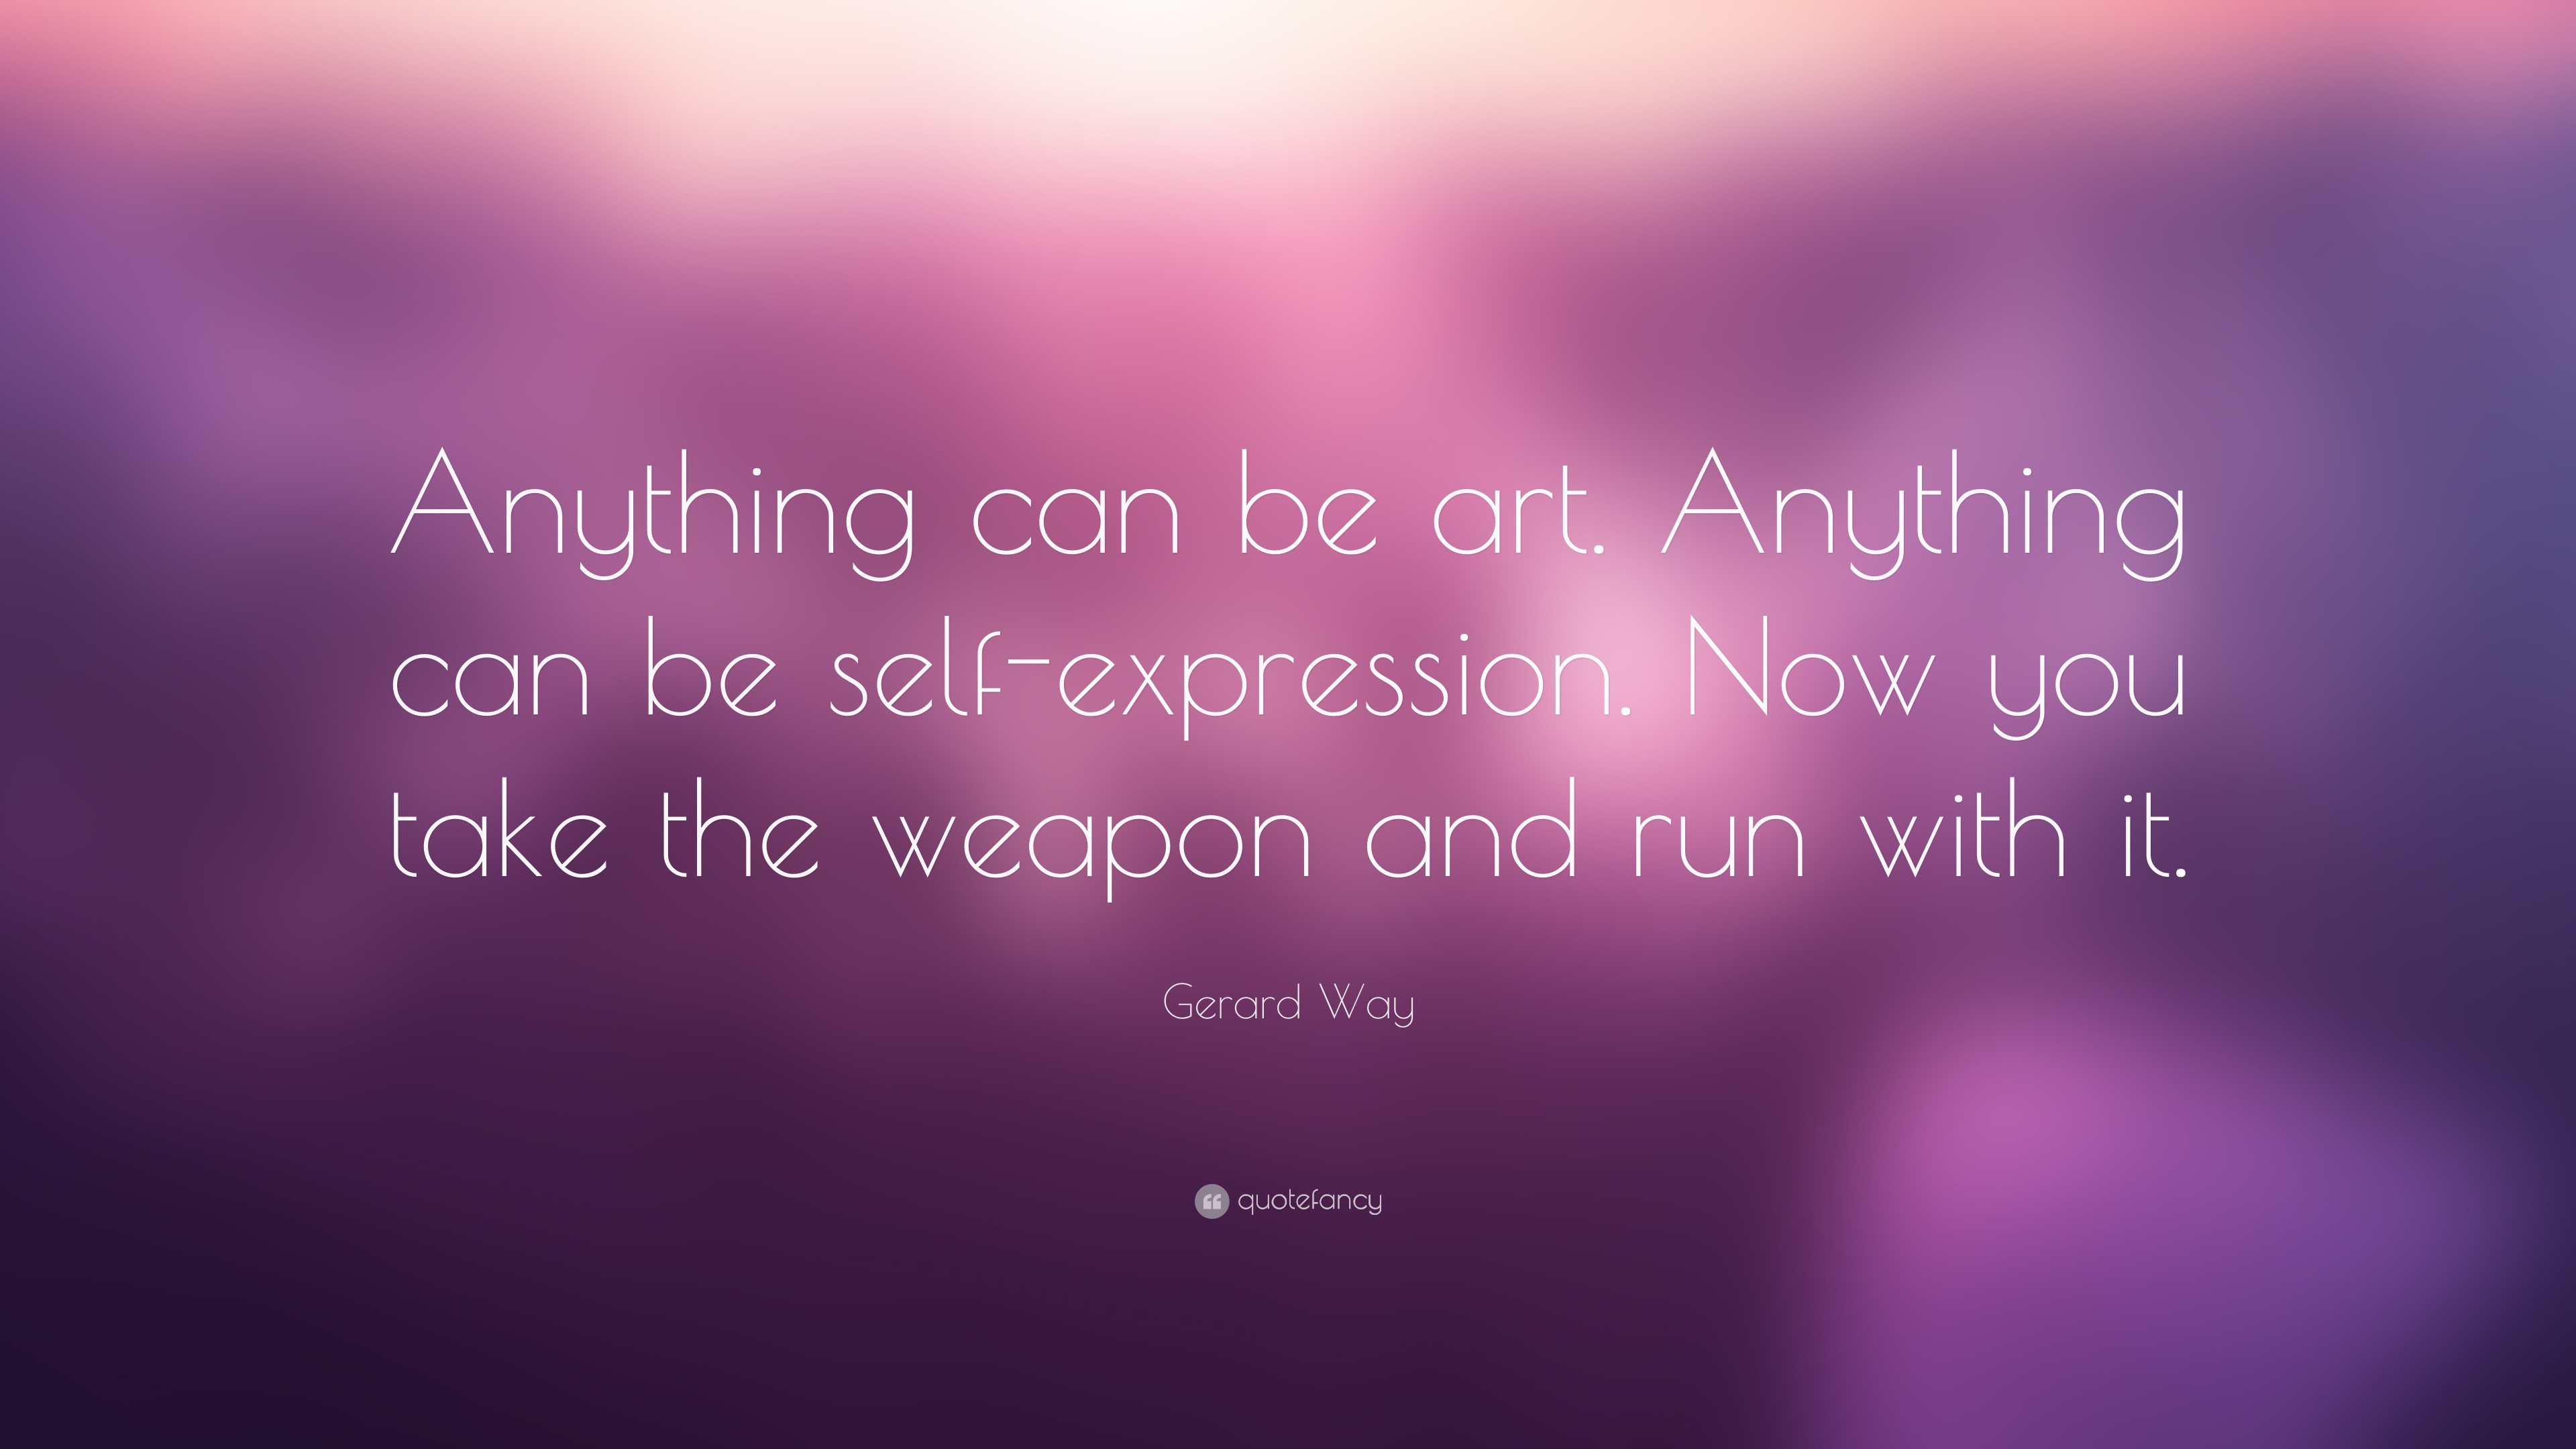 3840x2160 Gerard Way Quote: “Anything can be art. Anything can be self-expression